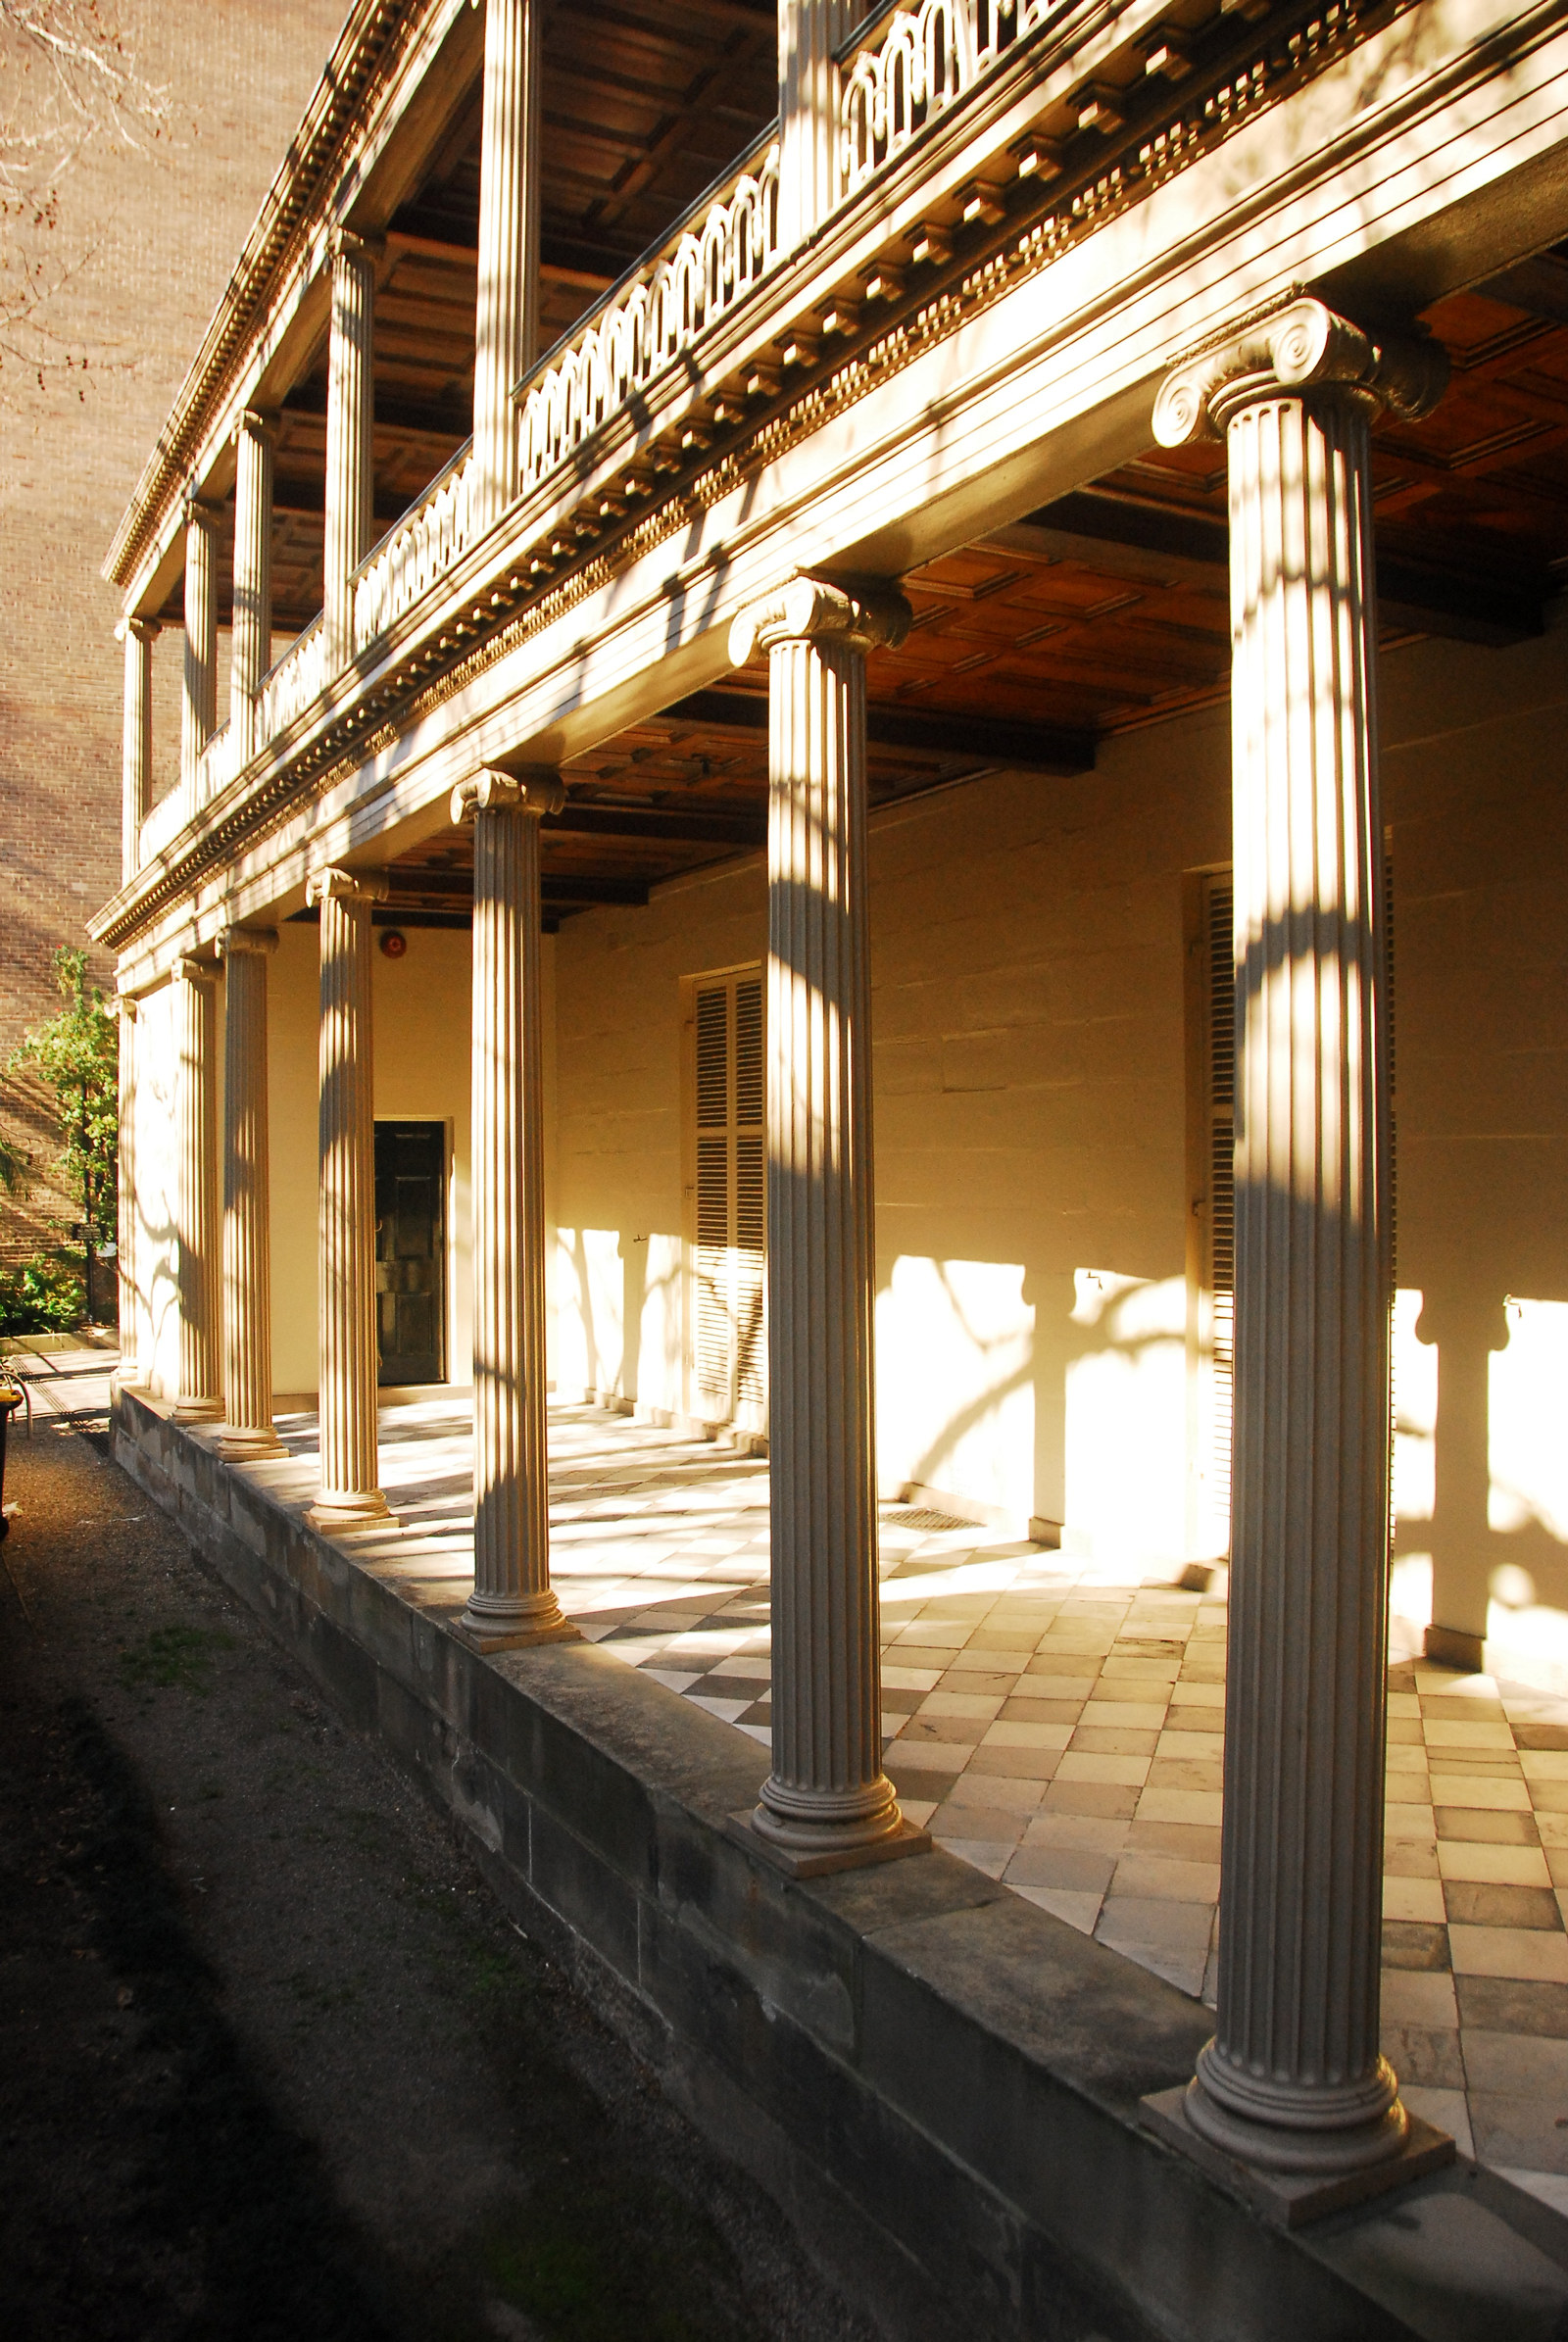 Exterior of two storey building, with columns, sunlit porch area and verandah above.